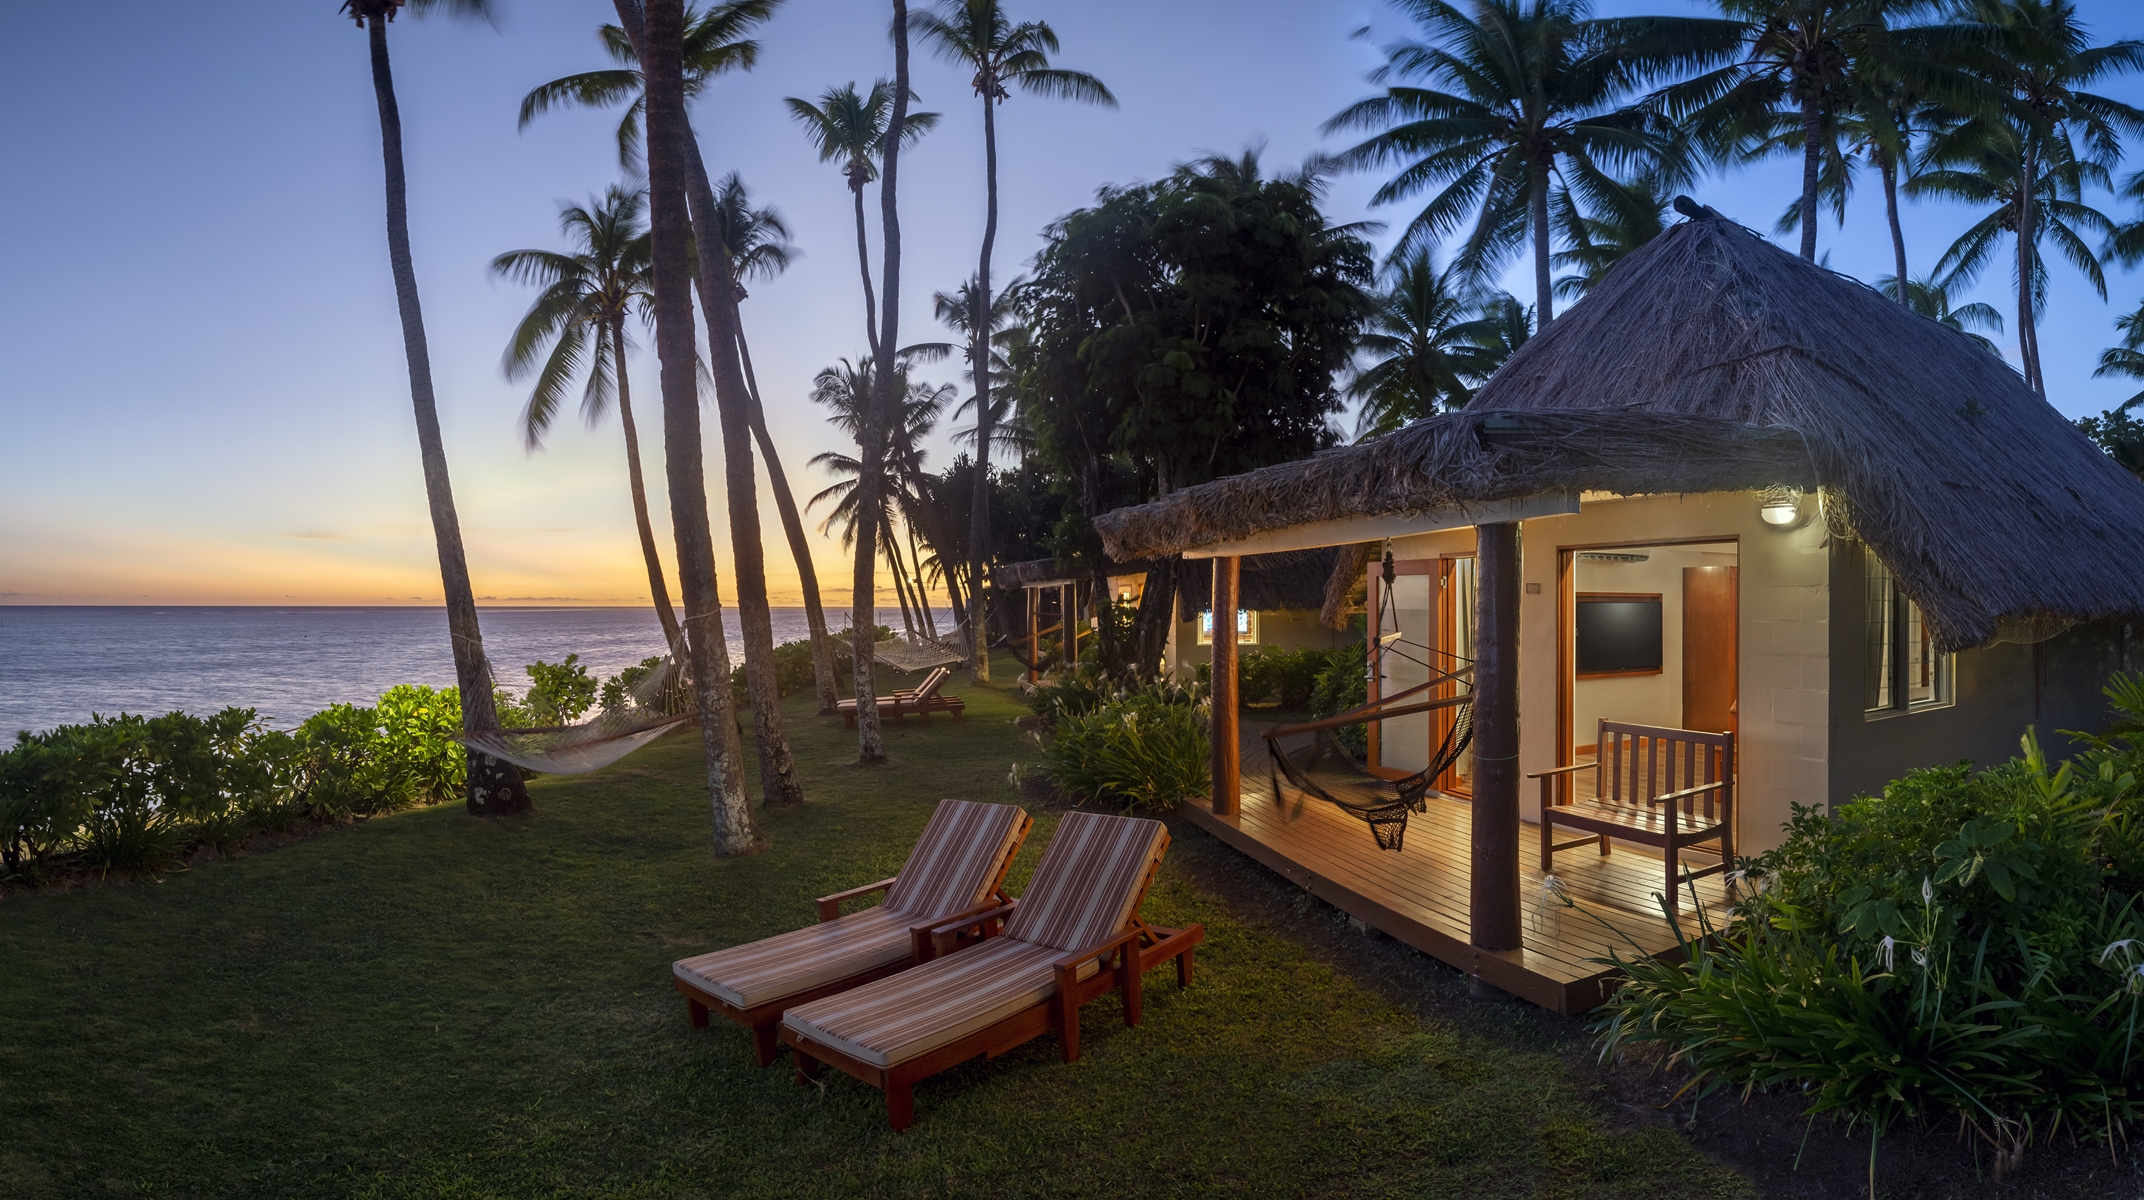 The Beachfront Bures at Outrigger Fiji Beach Resort are nestled amid palm trees, directly on the sandy shore